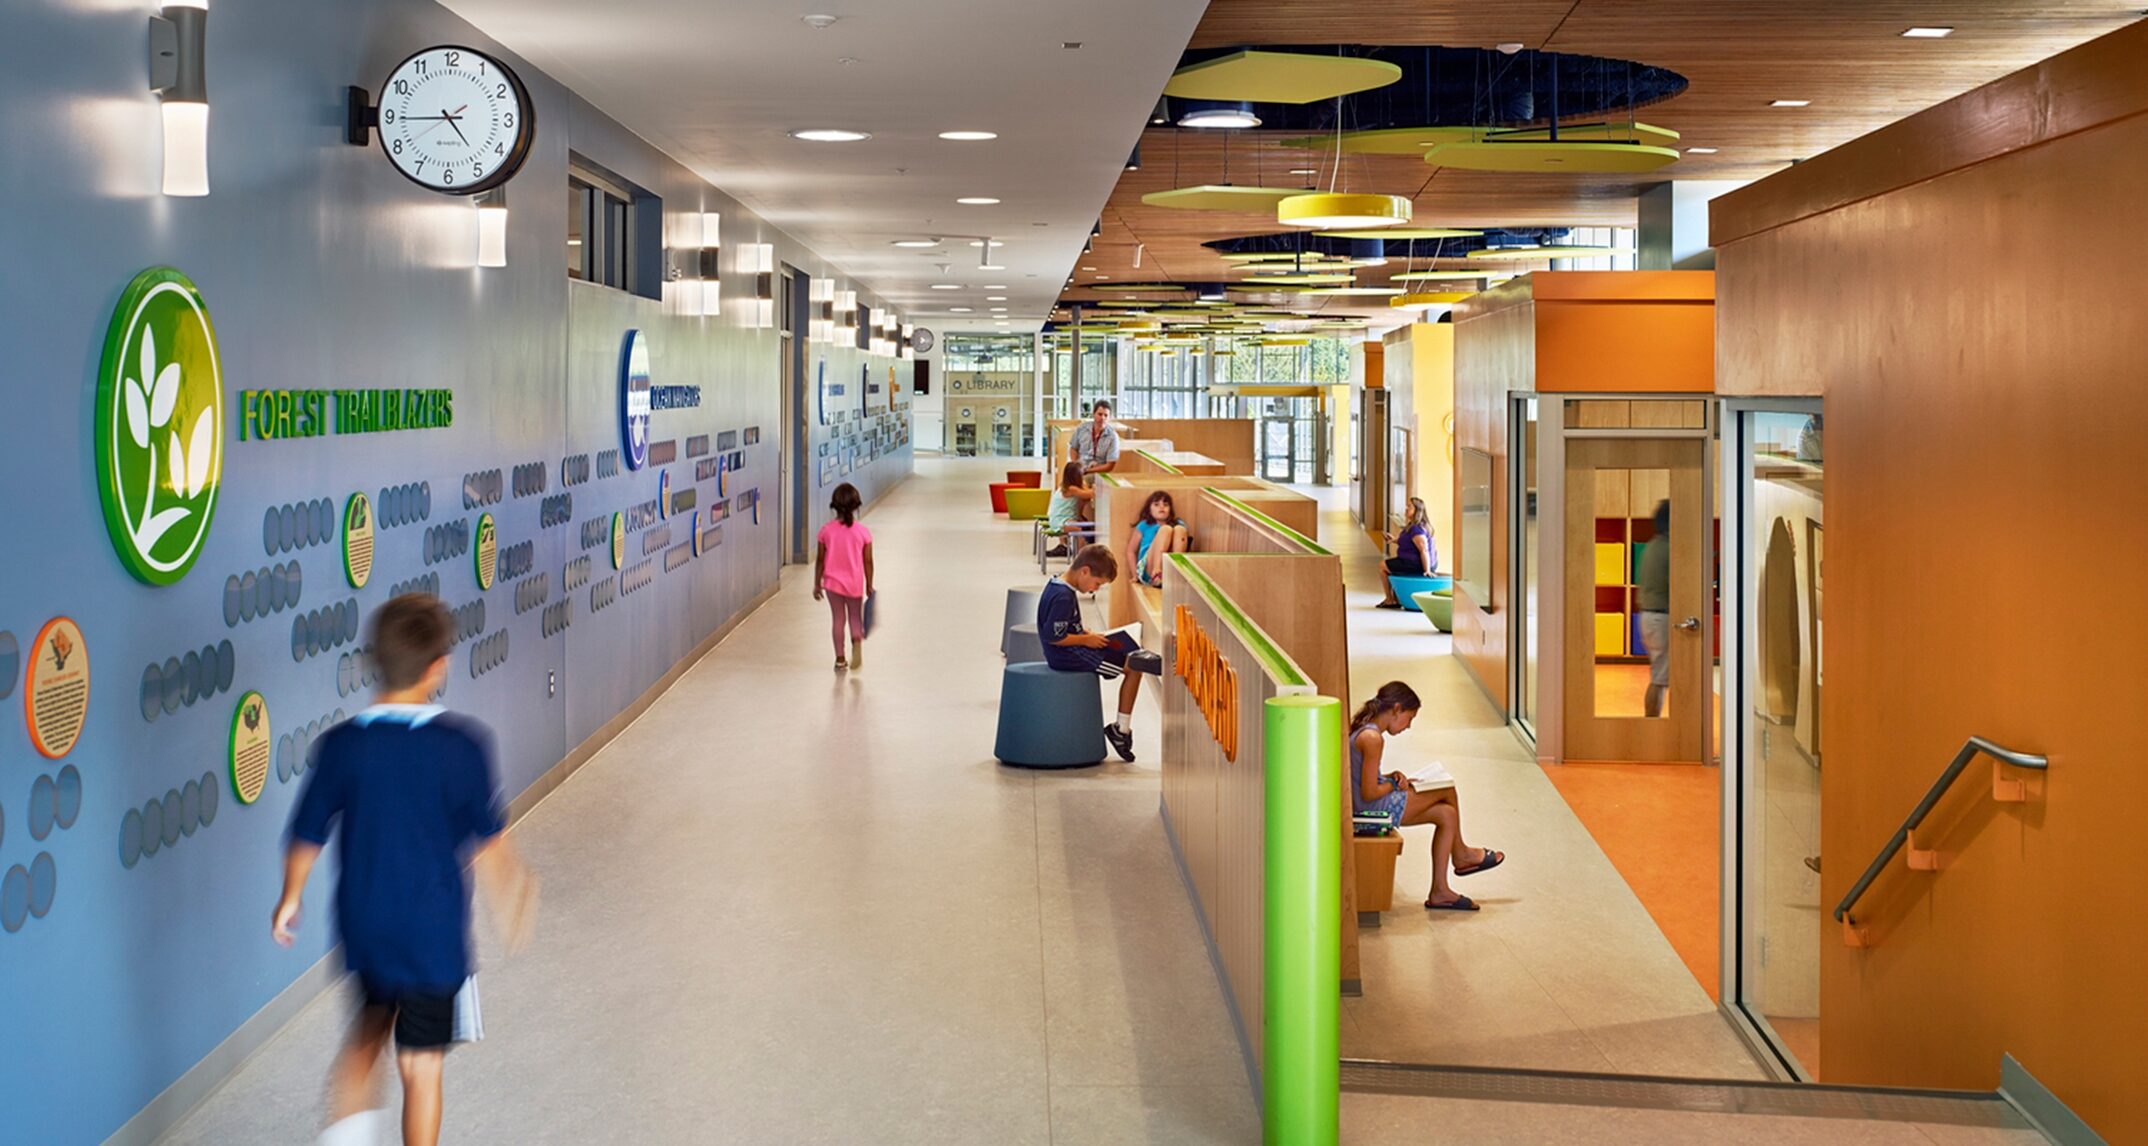 Every aspect of the Discovery Elementary School was organized to create a seamless integration between design, sustainability, and learning. As students move through the school, their “world expands” through different ecological storylines and graphically communicated environmental themes. - VMDO